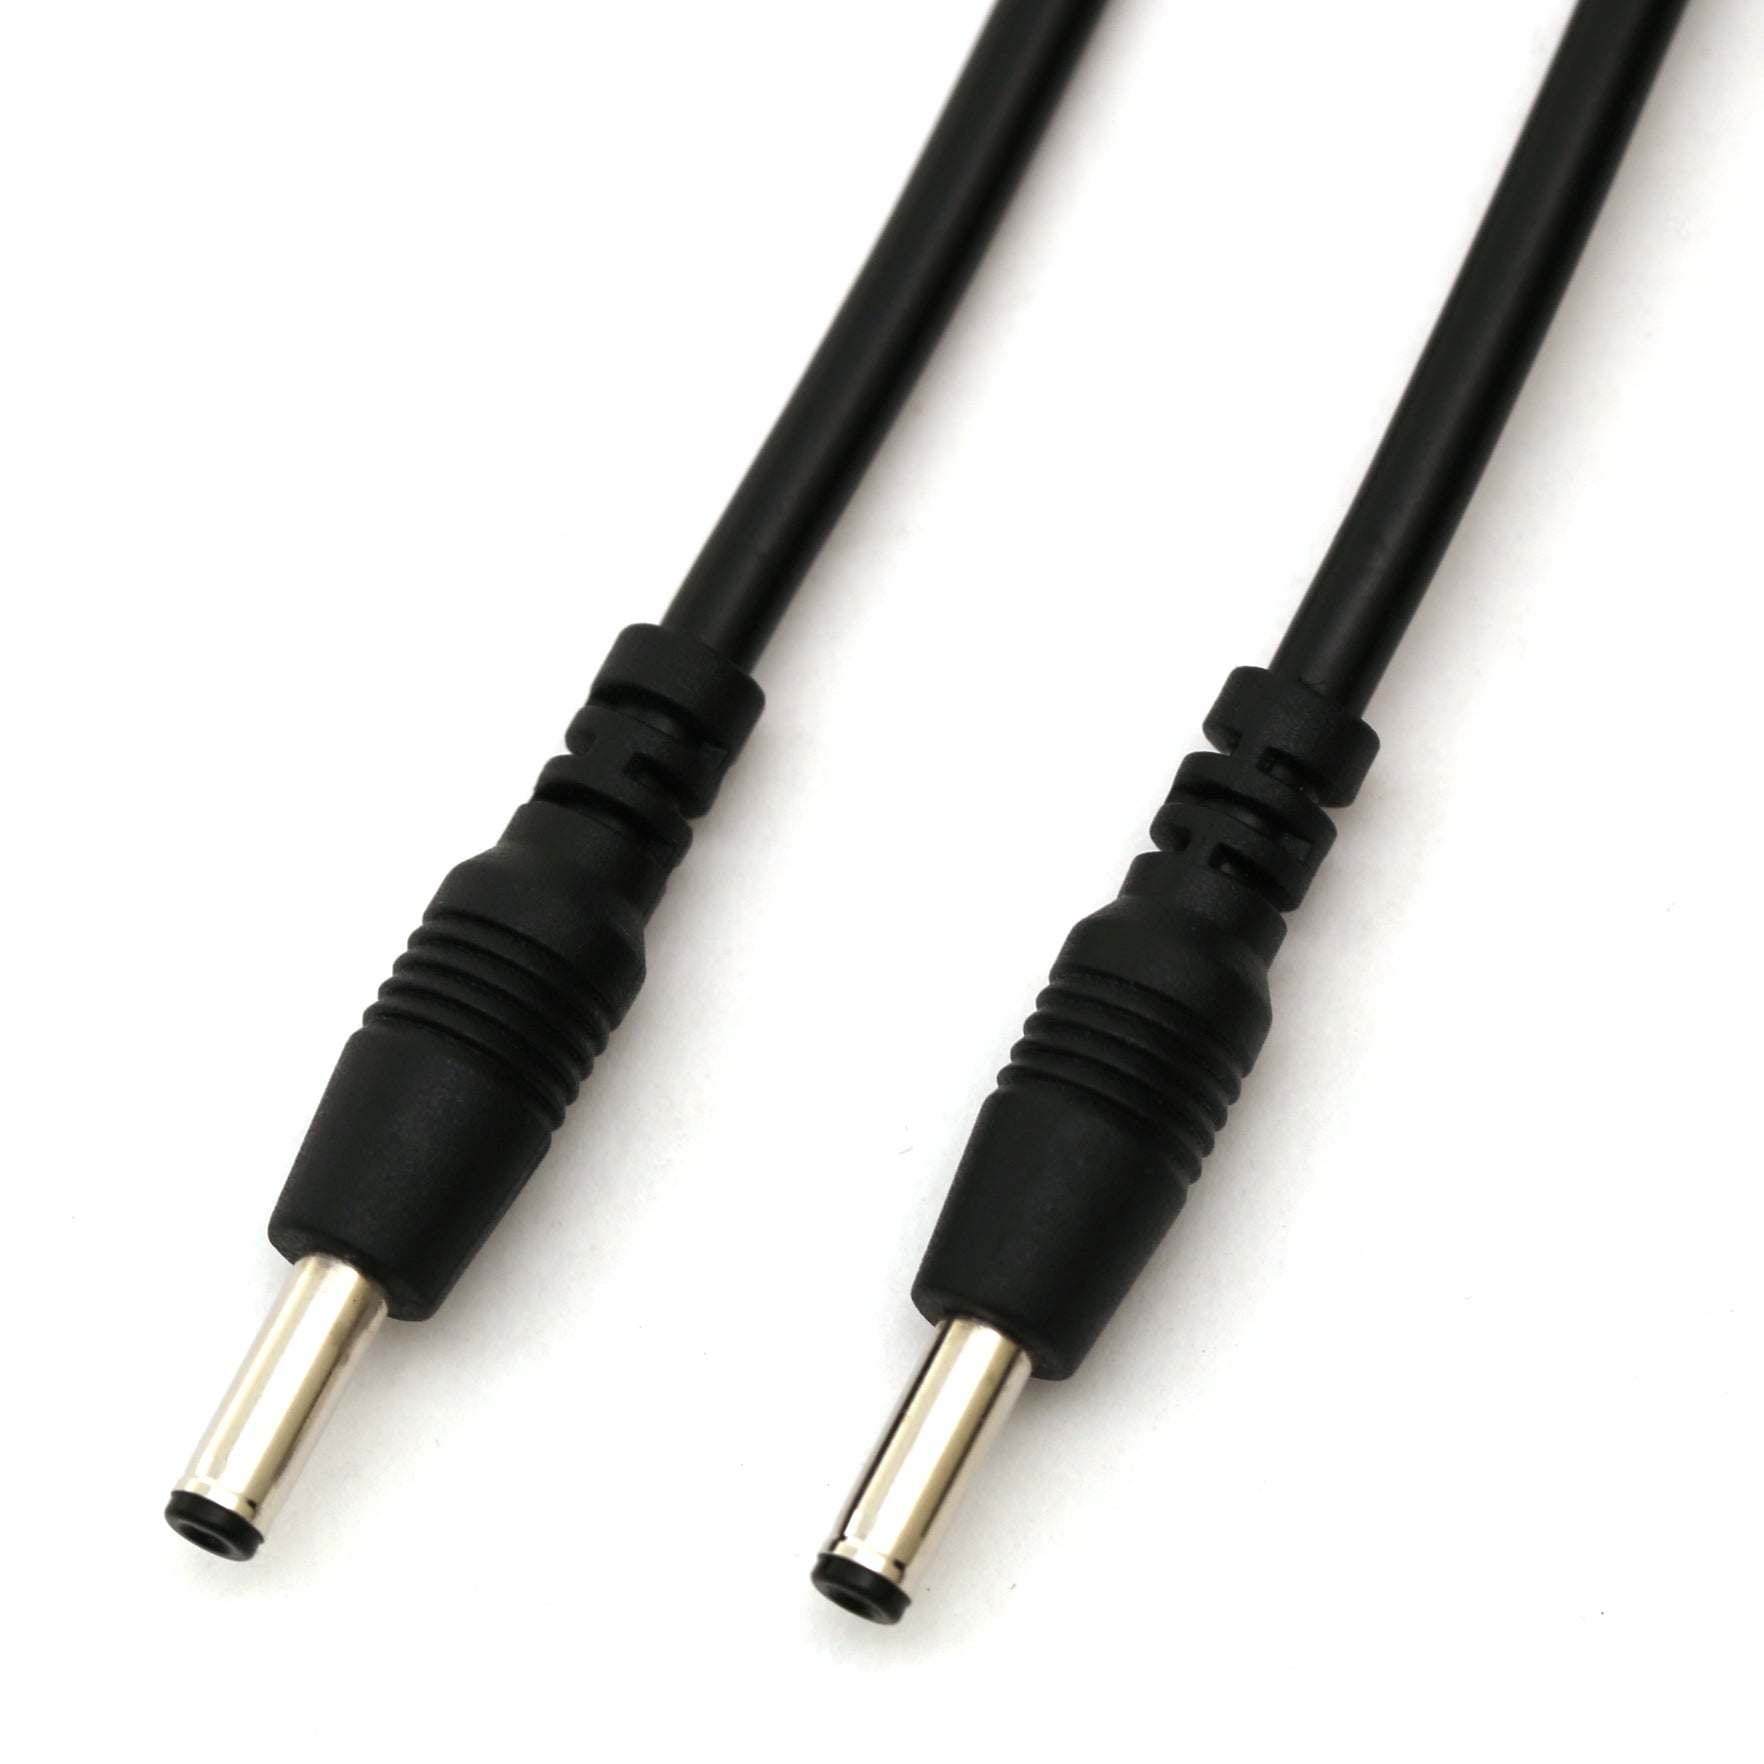 12ft In-Wall Rated Interconnect Cable for Modular LED Under Cabinet Lighting (Black)